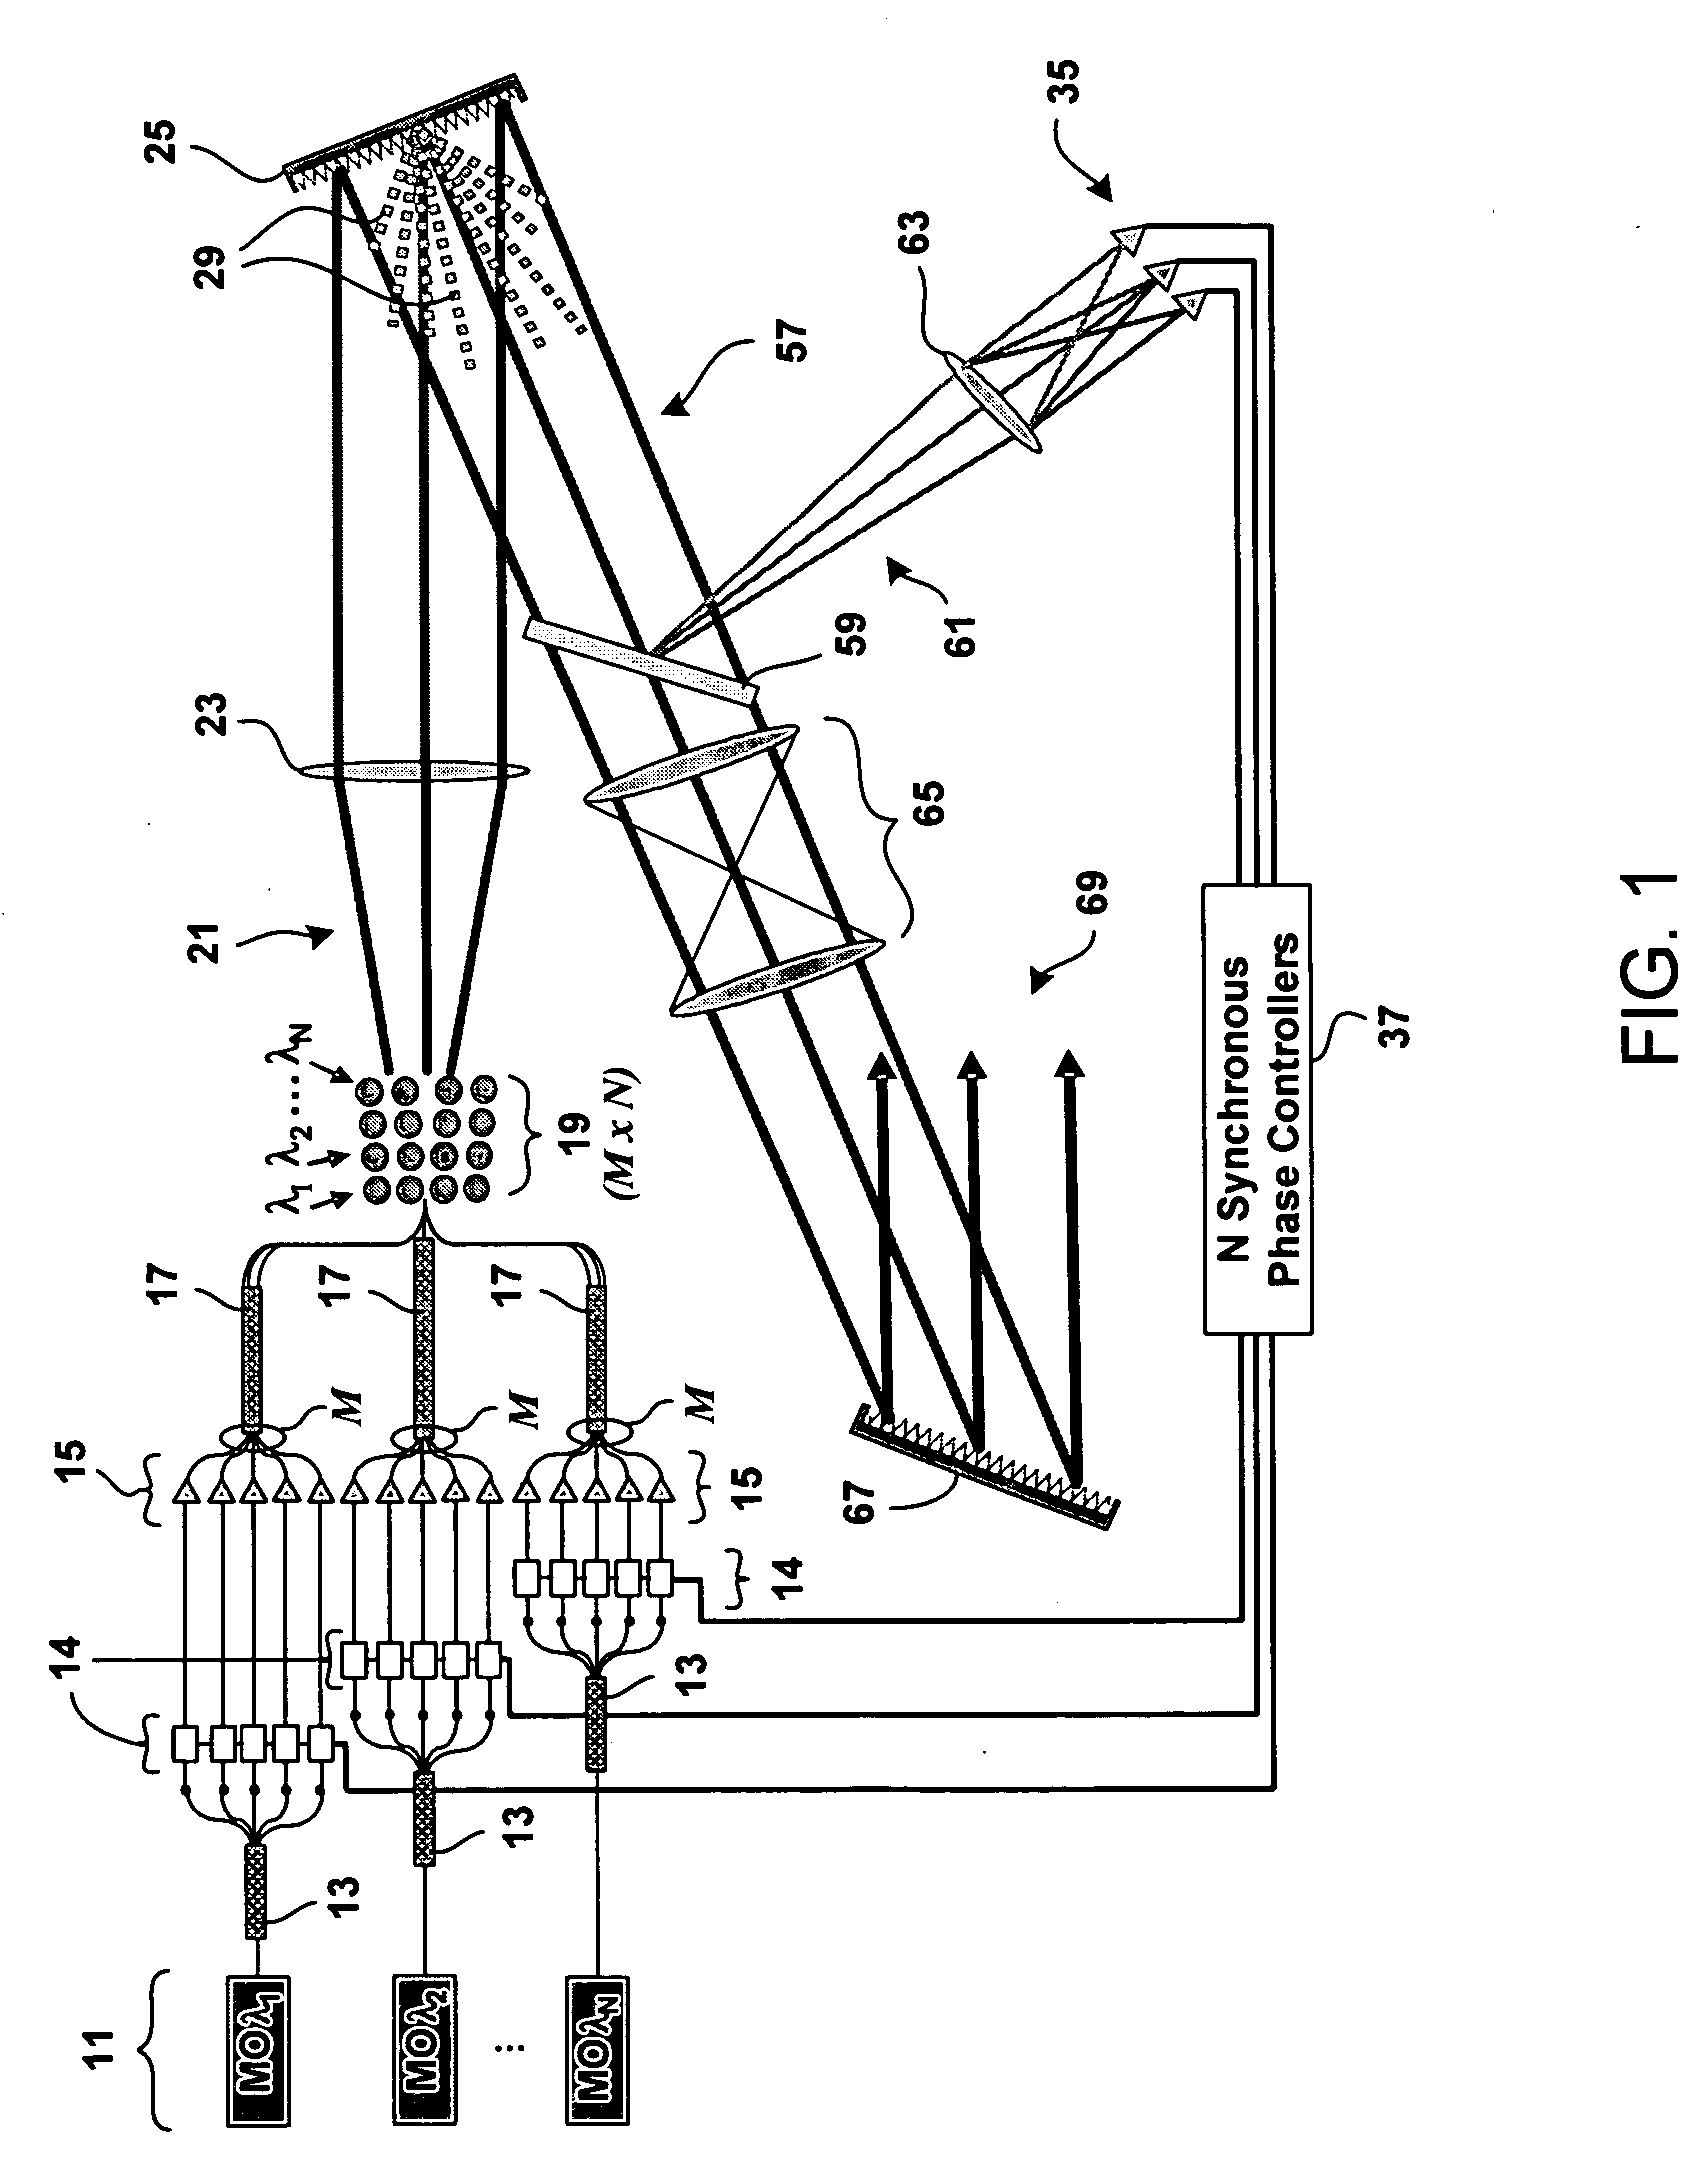 Method and system for hybrid coherent and incoherent diffractive beam combining